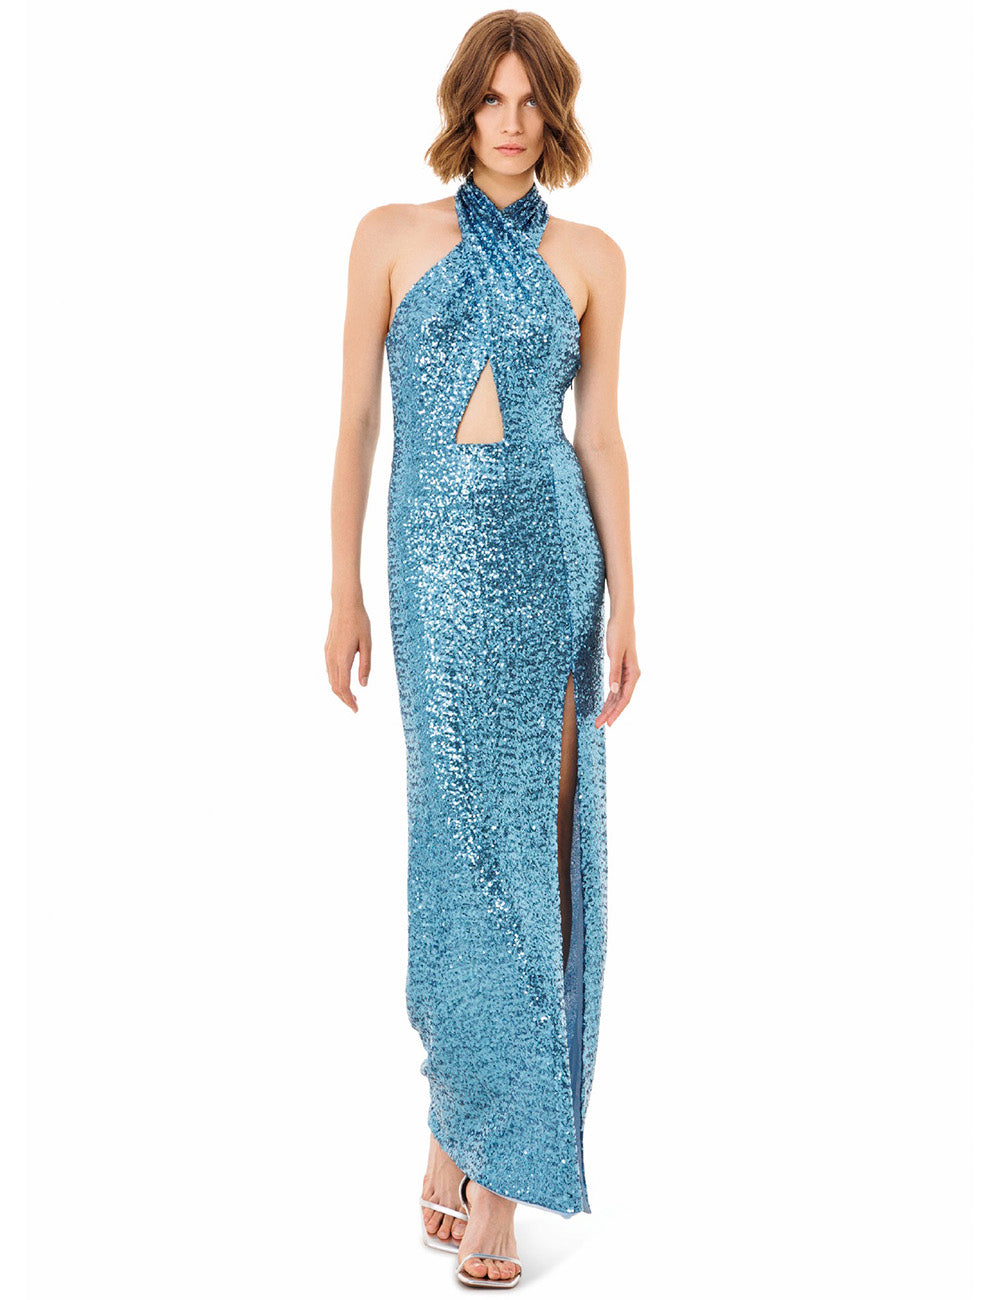 Mermaid dress with sequins